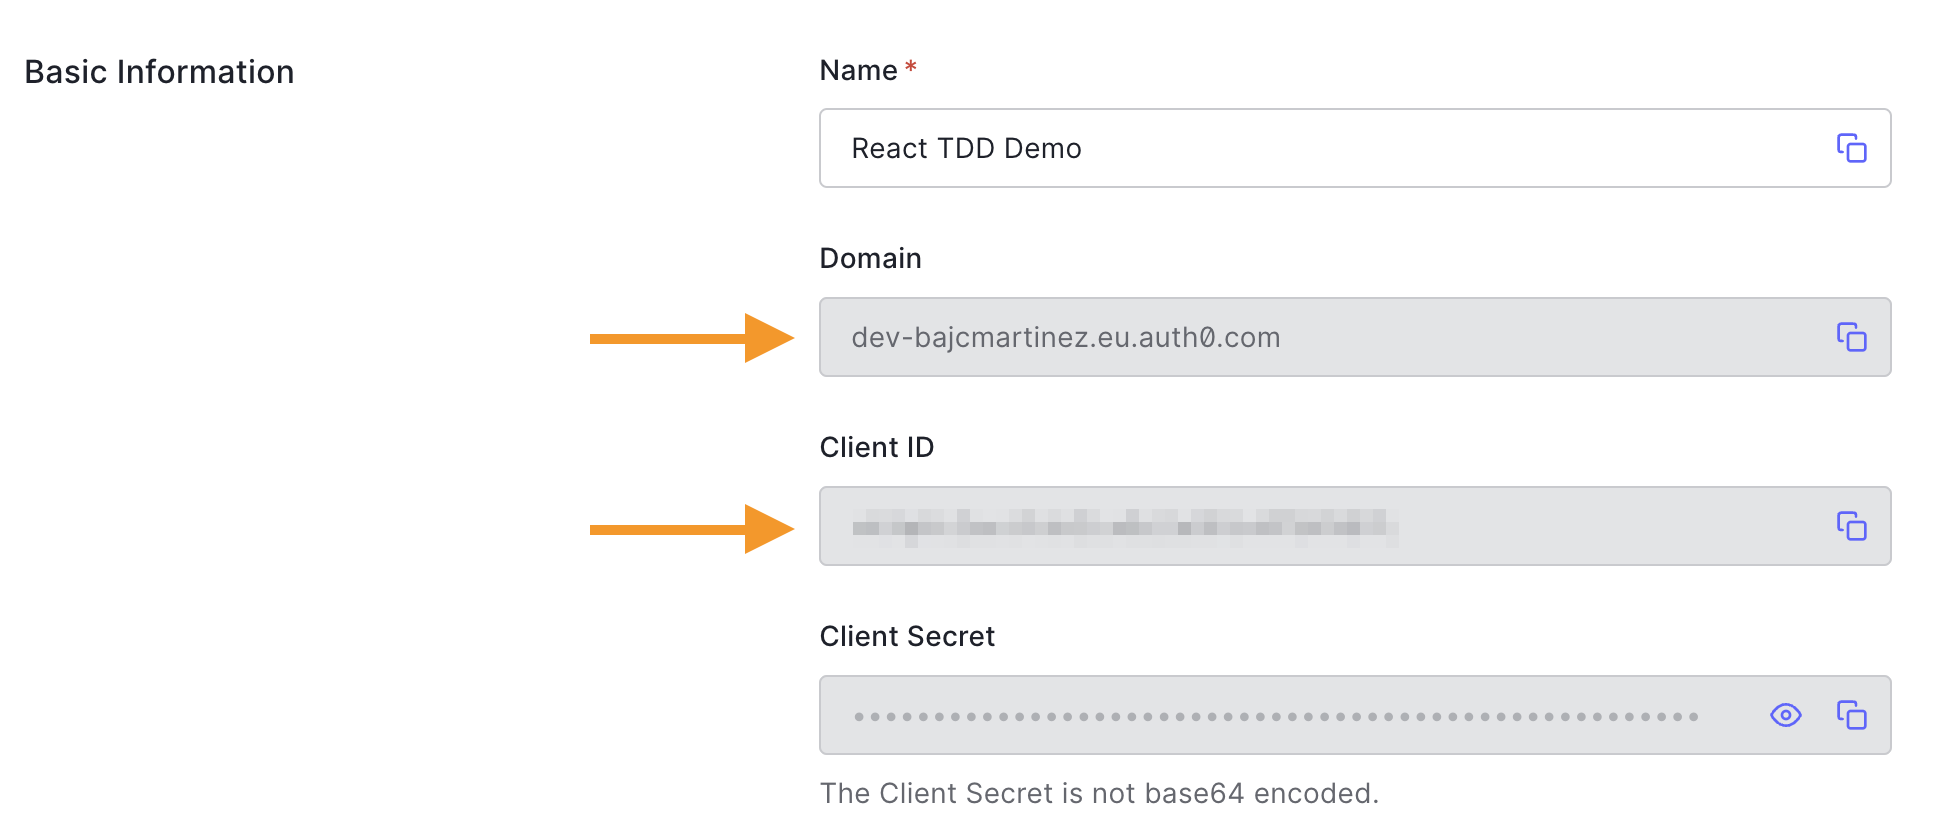 You can retrieve the Auth0 domain and client id from the application's settings